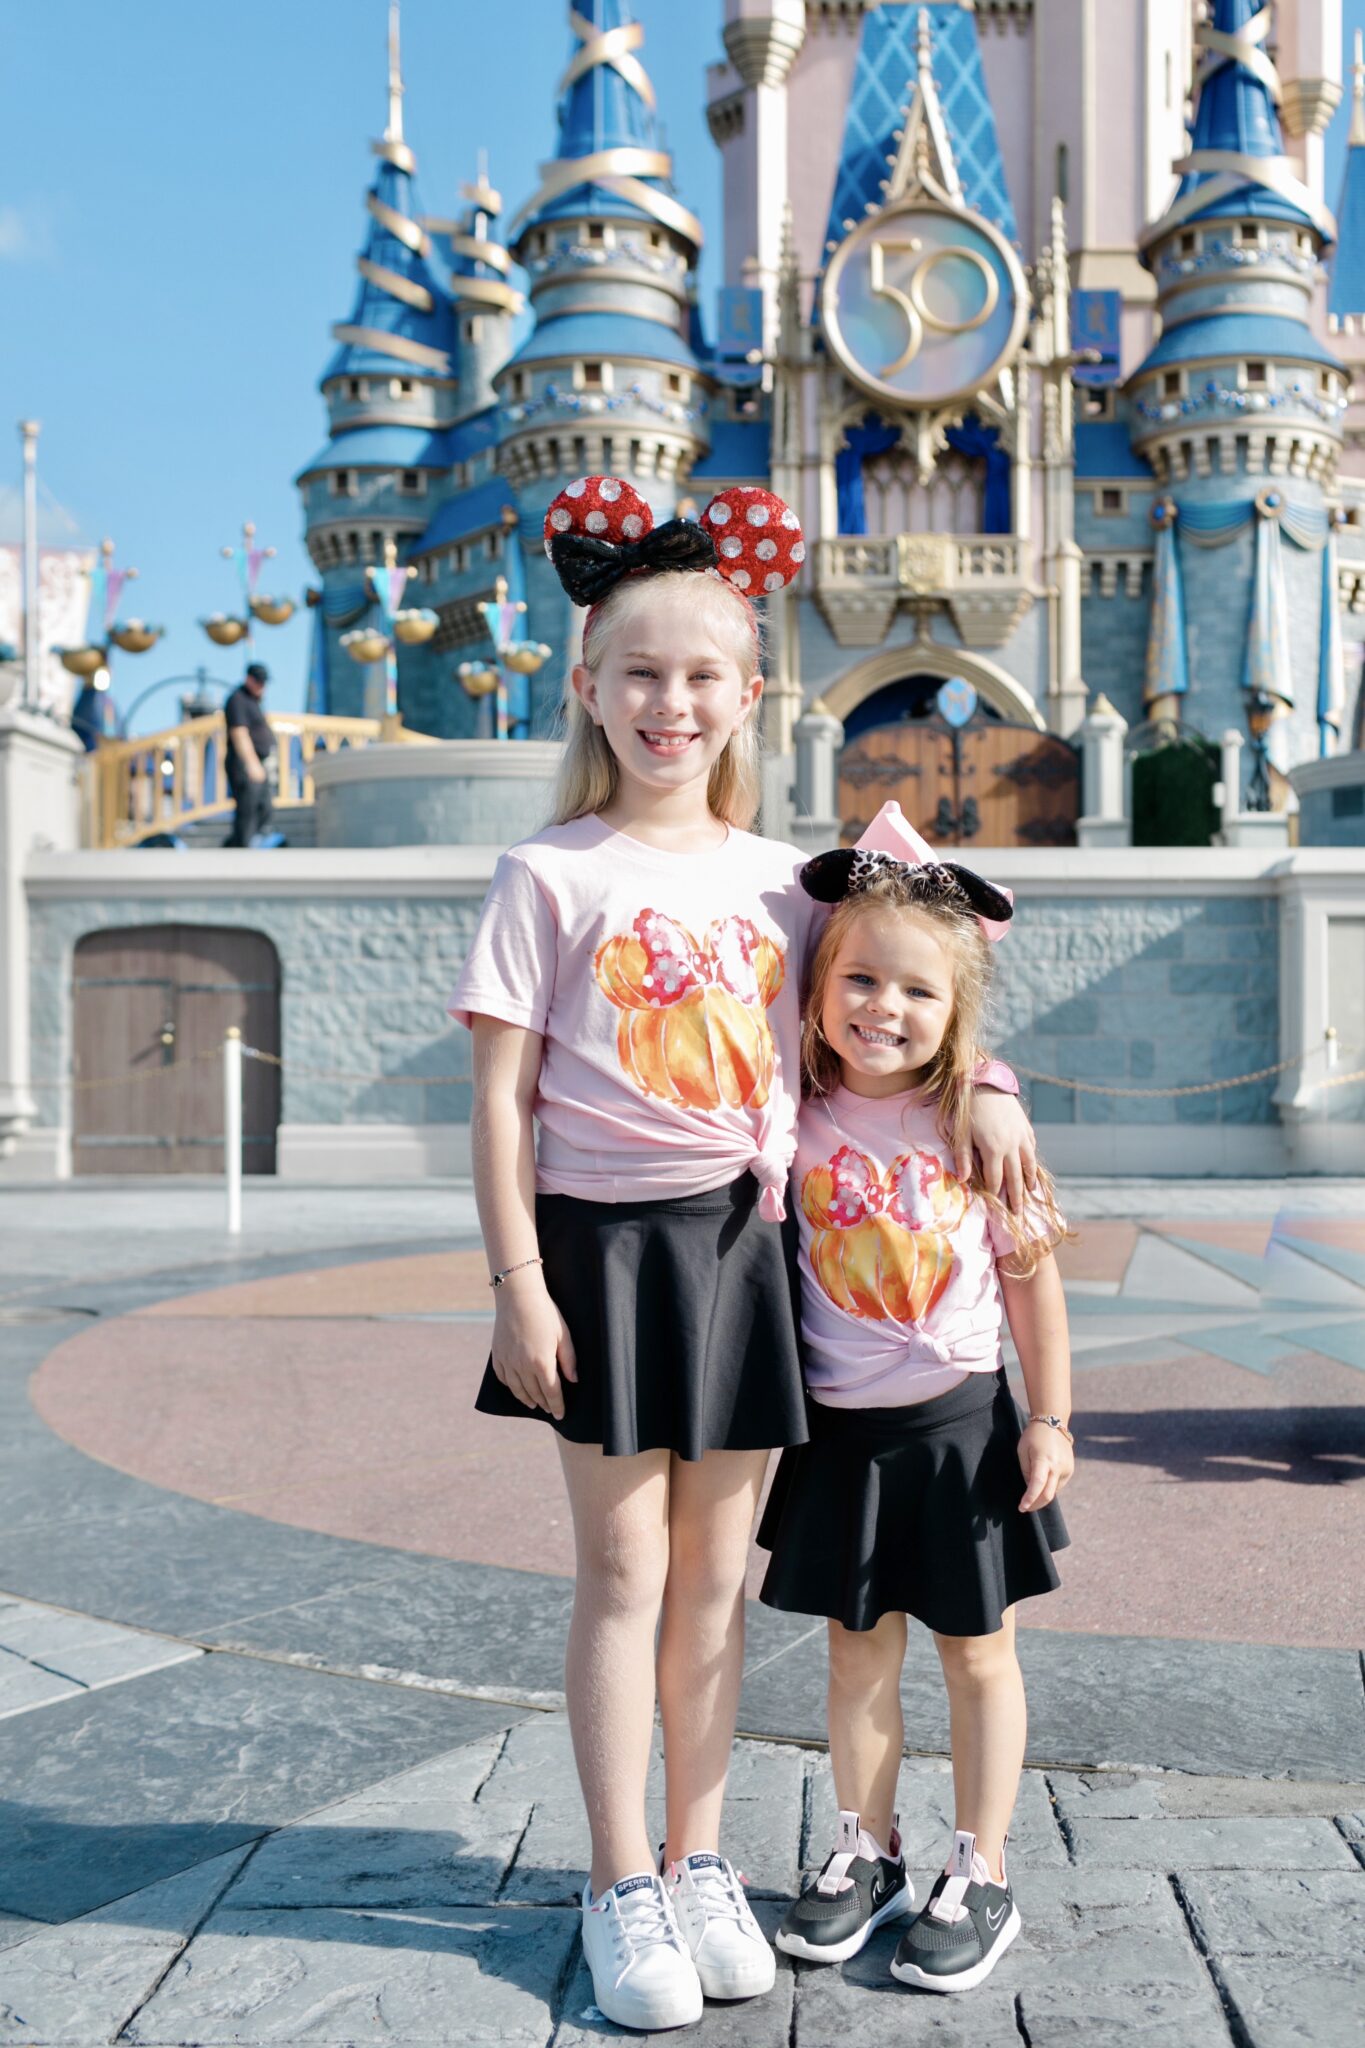 Tips for Traveling to Disney World With Young Kids